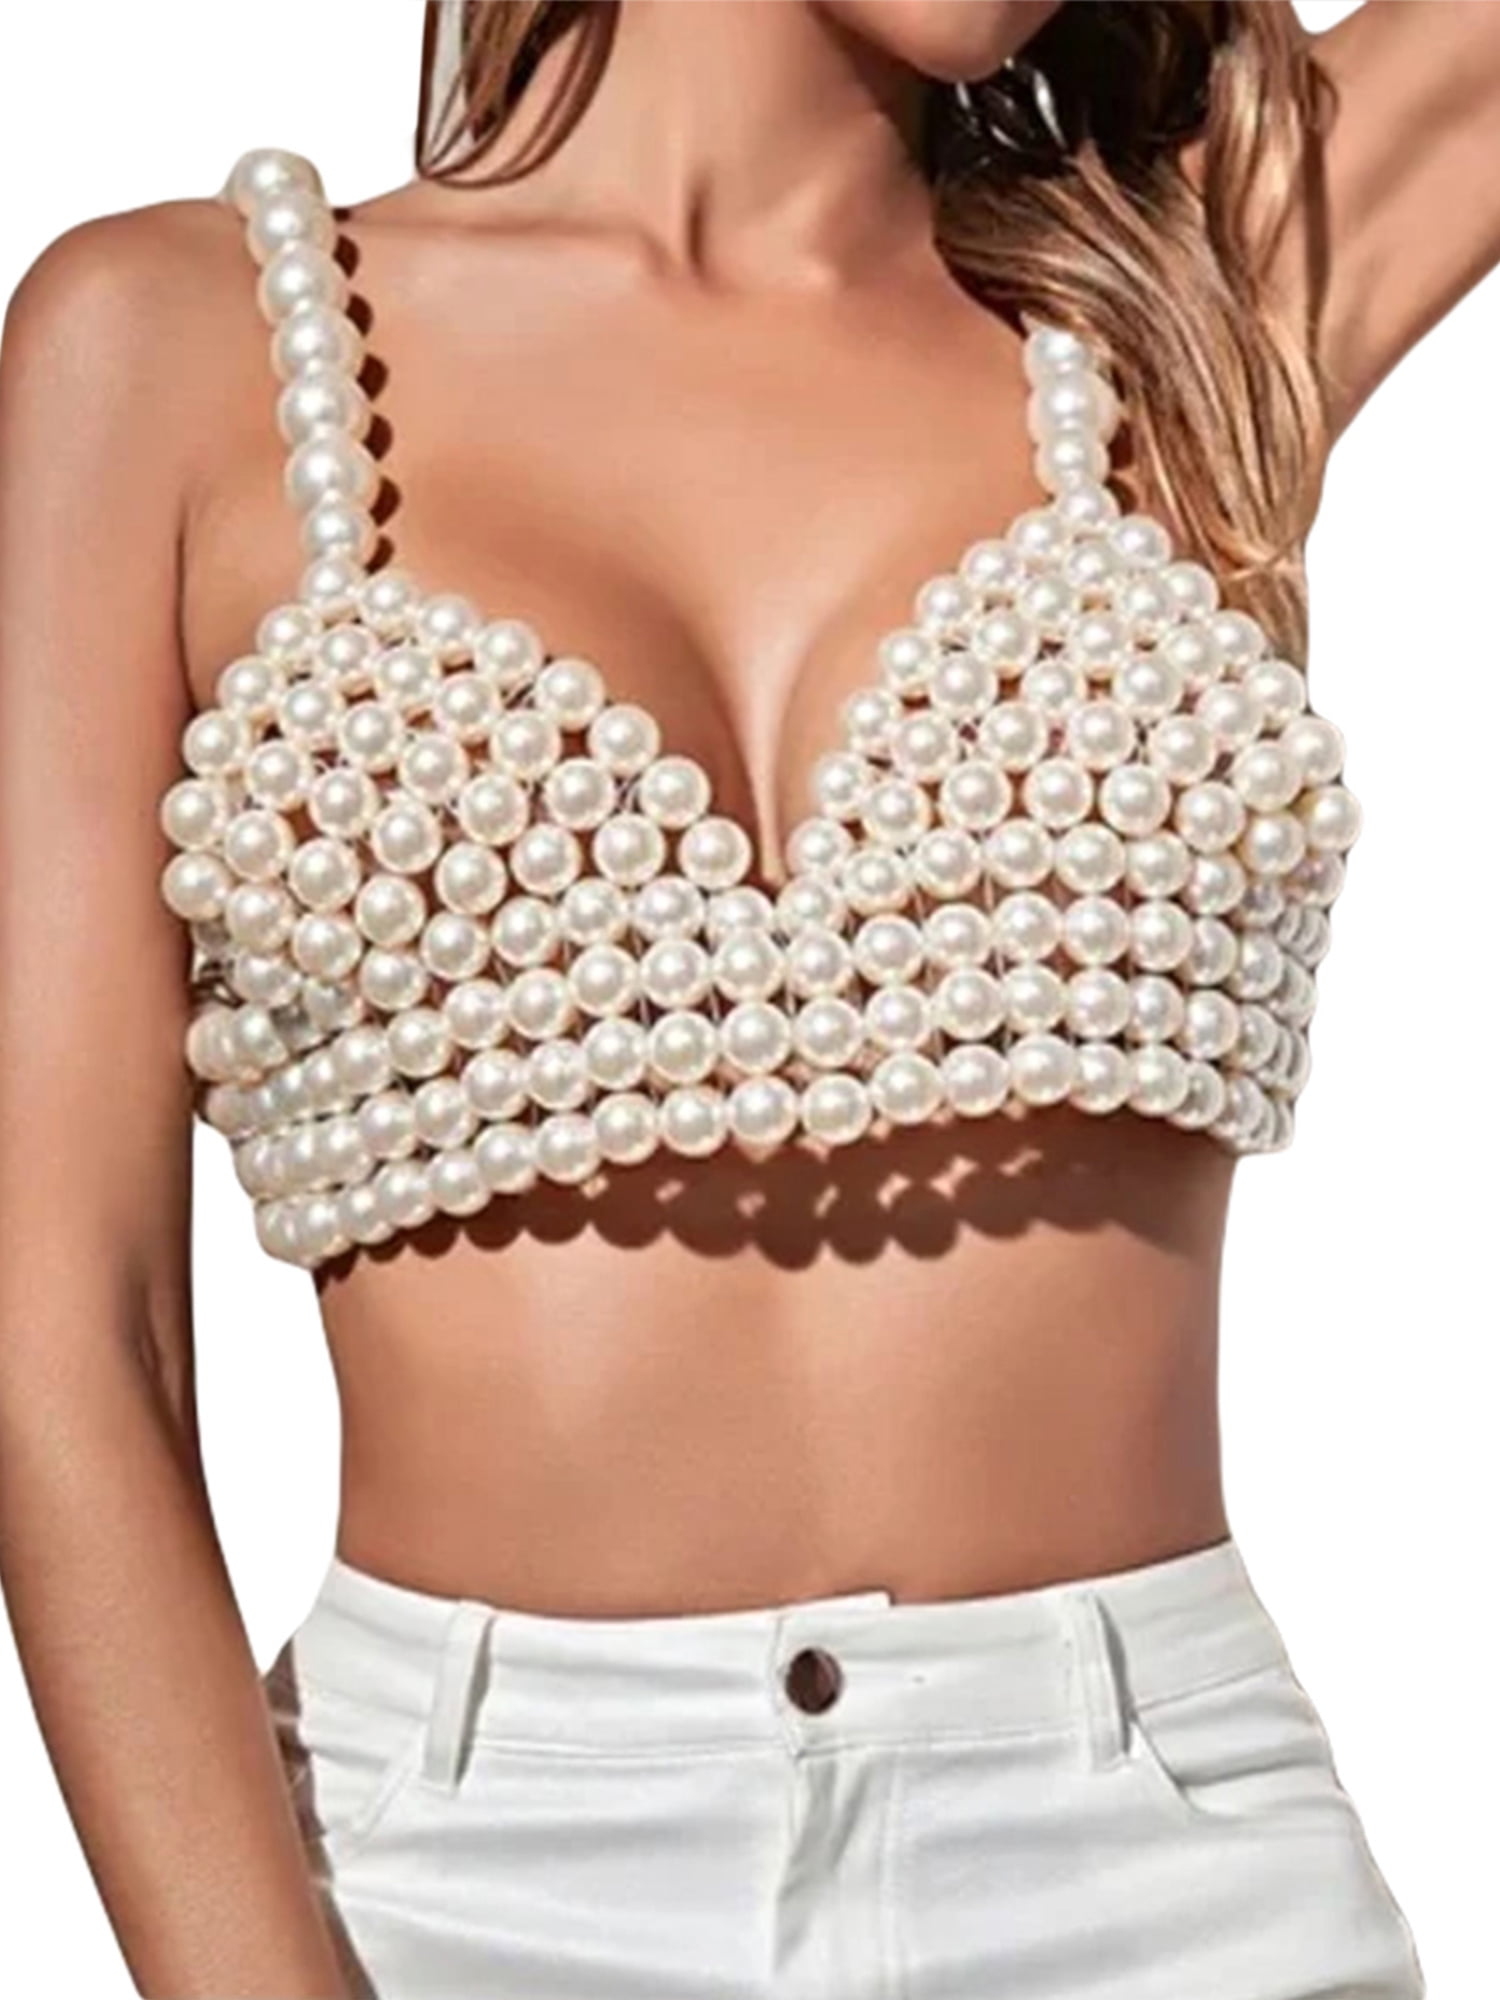 Pearl Beaded Crop Tops for Women Sexy Cami Top Spaghetti Strap